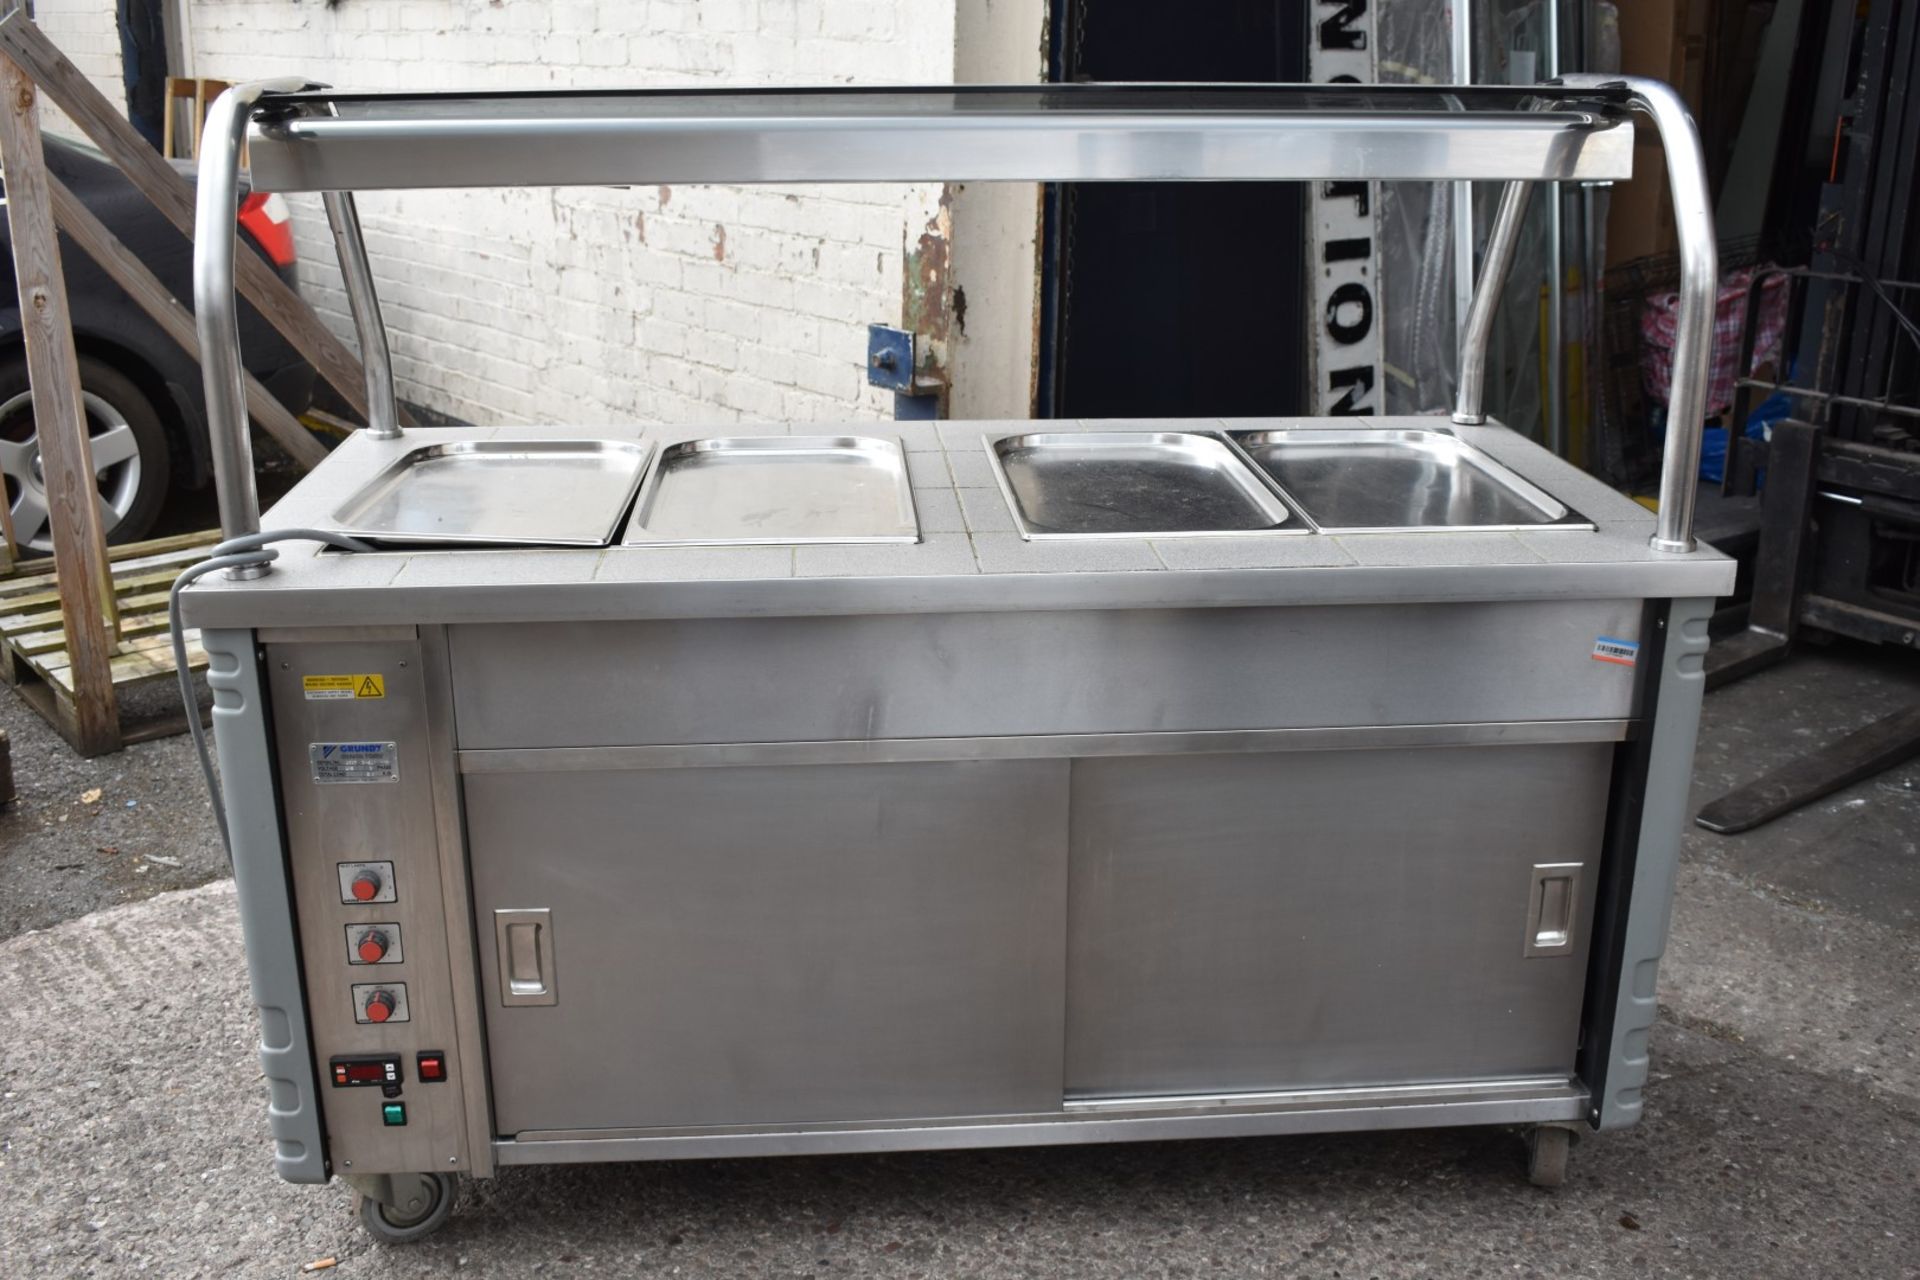 1 x Commercial Catering Server With Hot Plates, Warming Cupboards and Gantry Heater - Stainless - Image 4 of 4